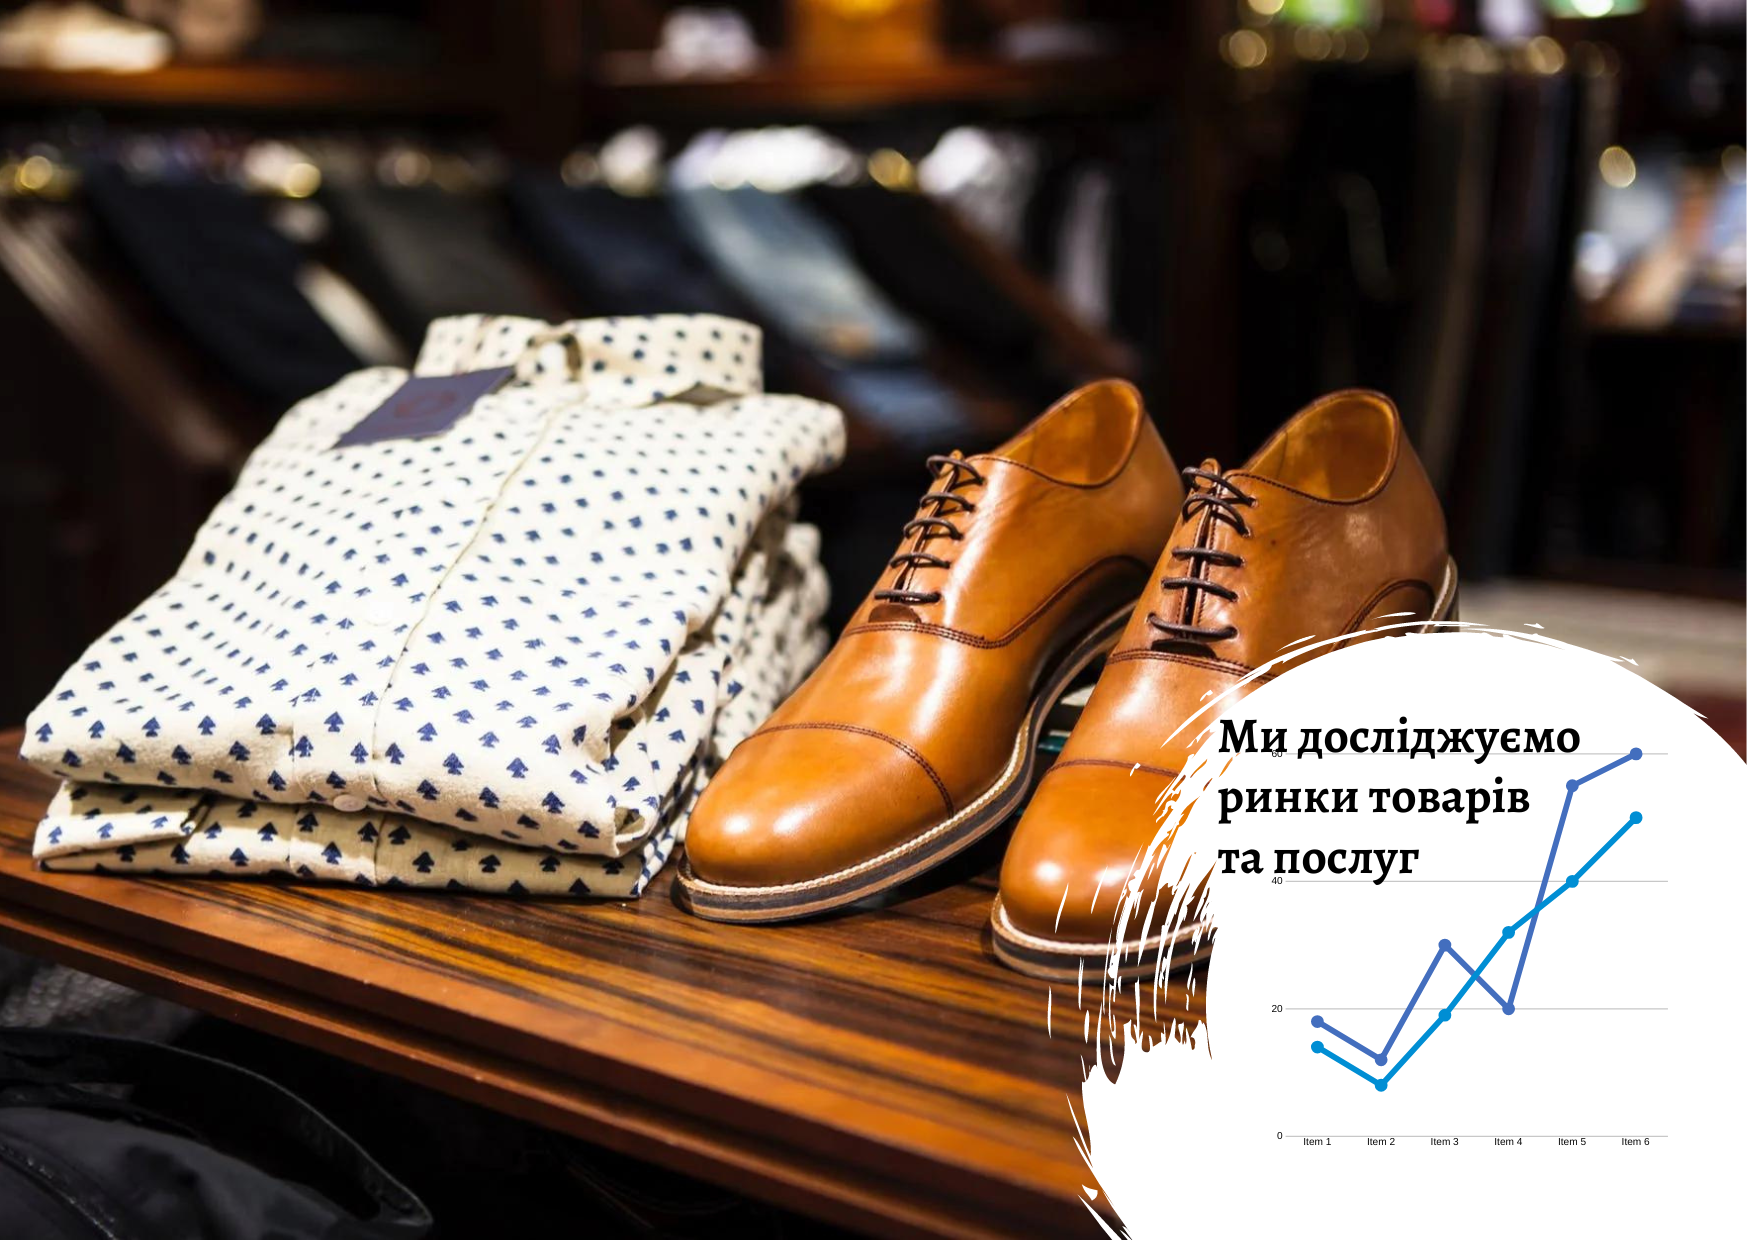 Ukrainian clothing and footwear markets: wartime trends